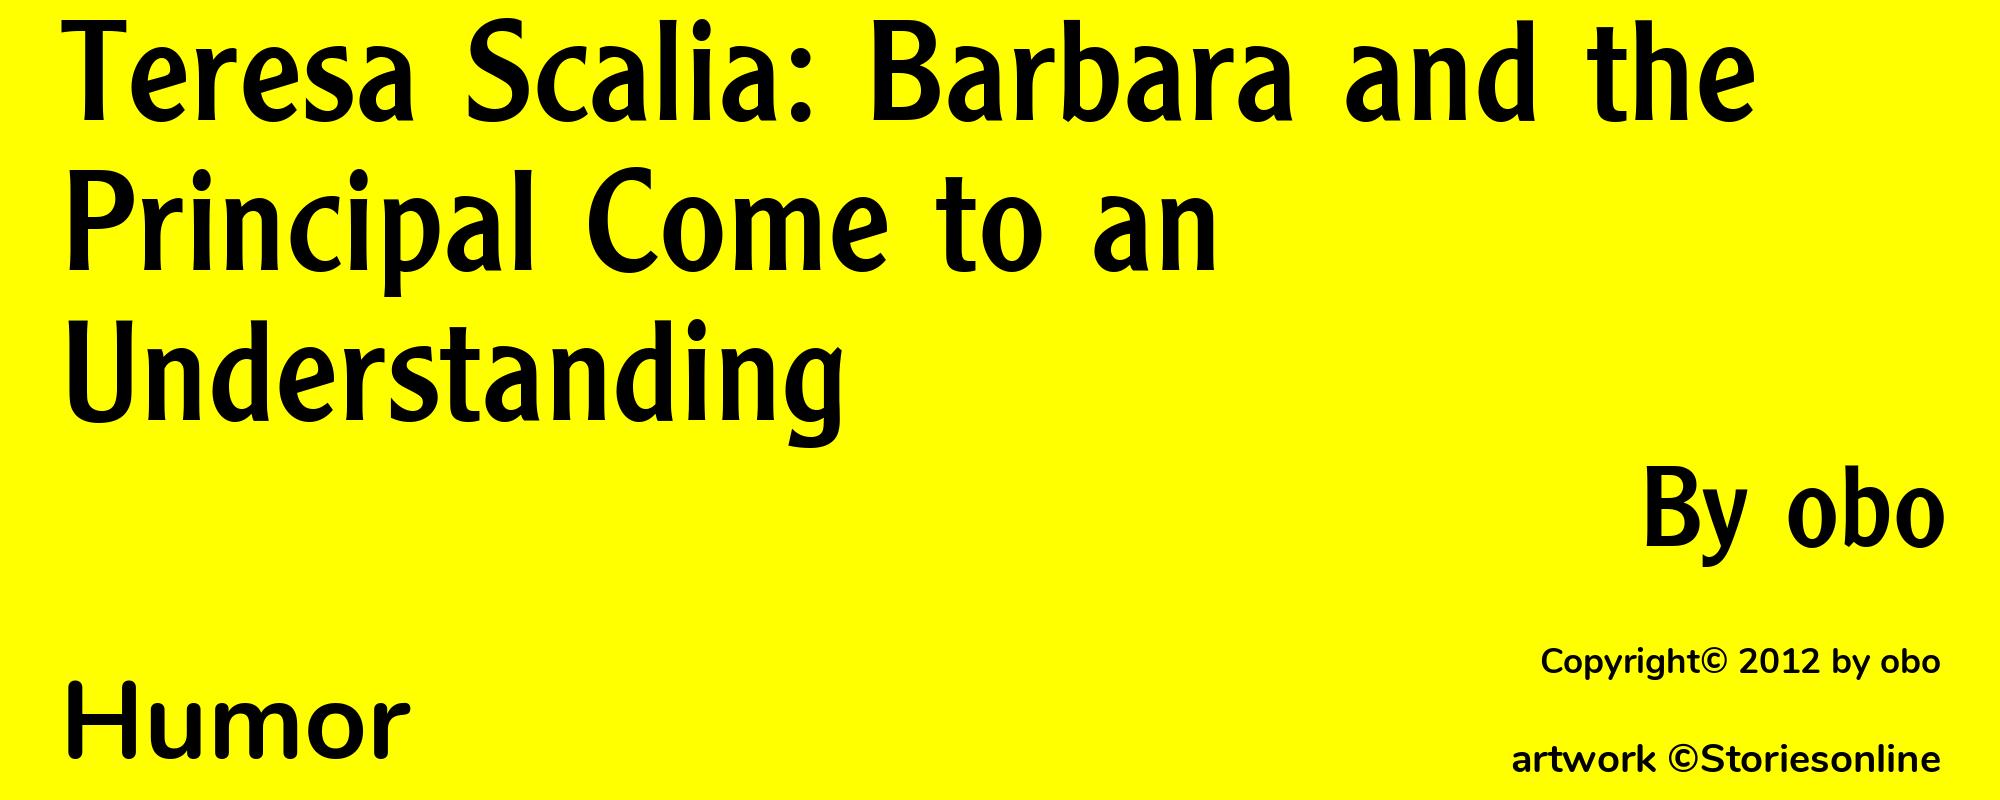 Teresa Scalia: Barbara and the Principal Come to an Understanding - Cover